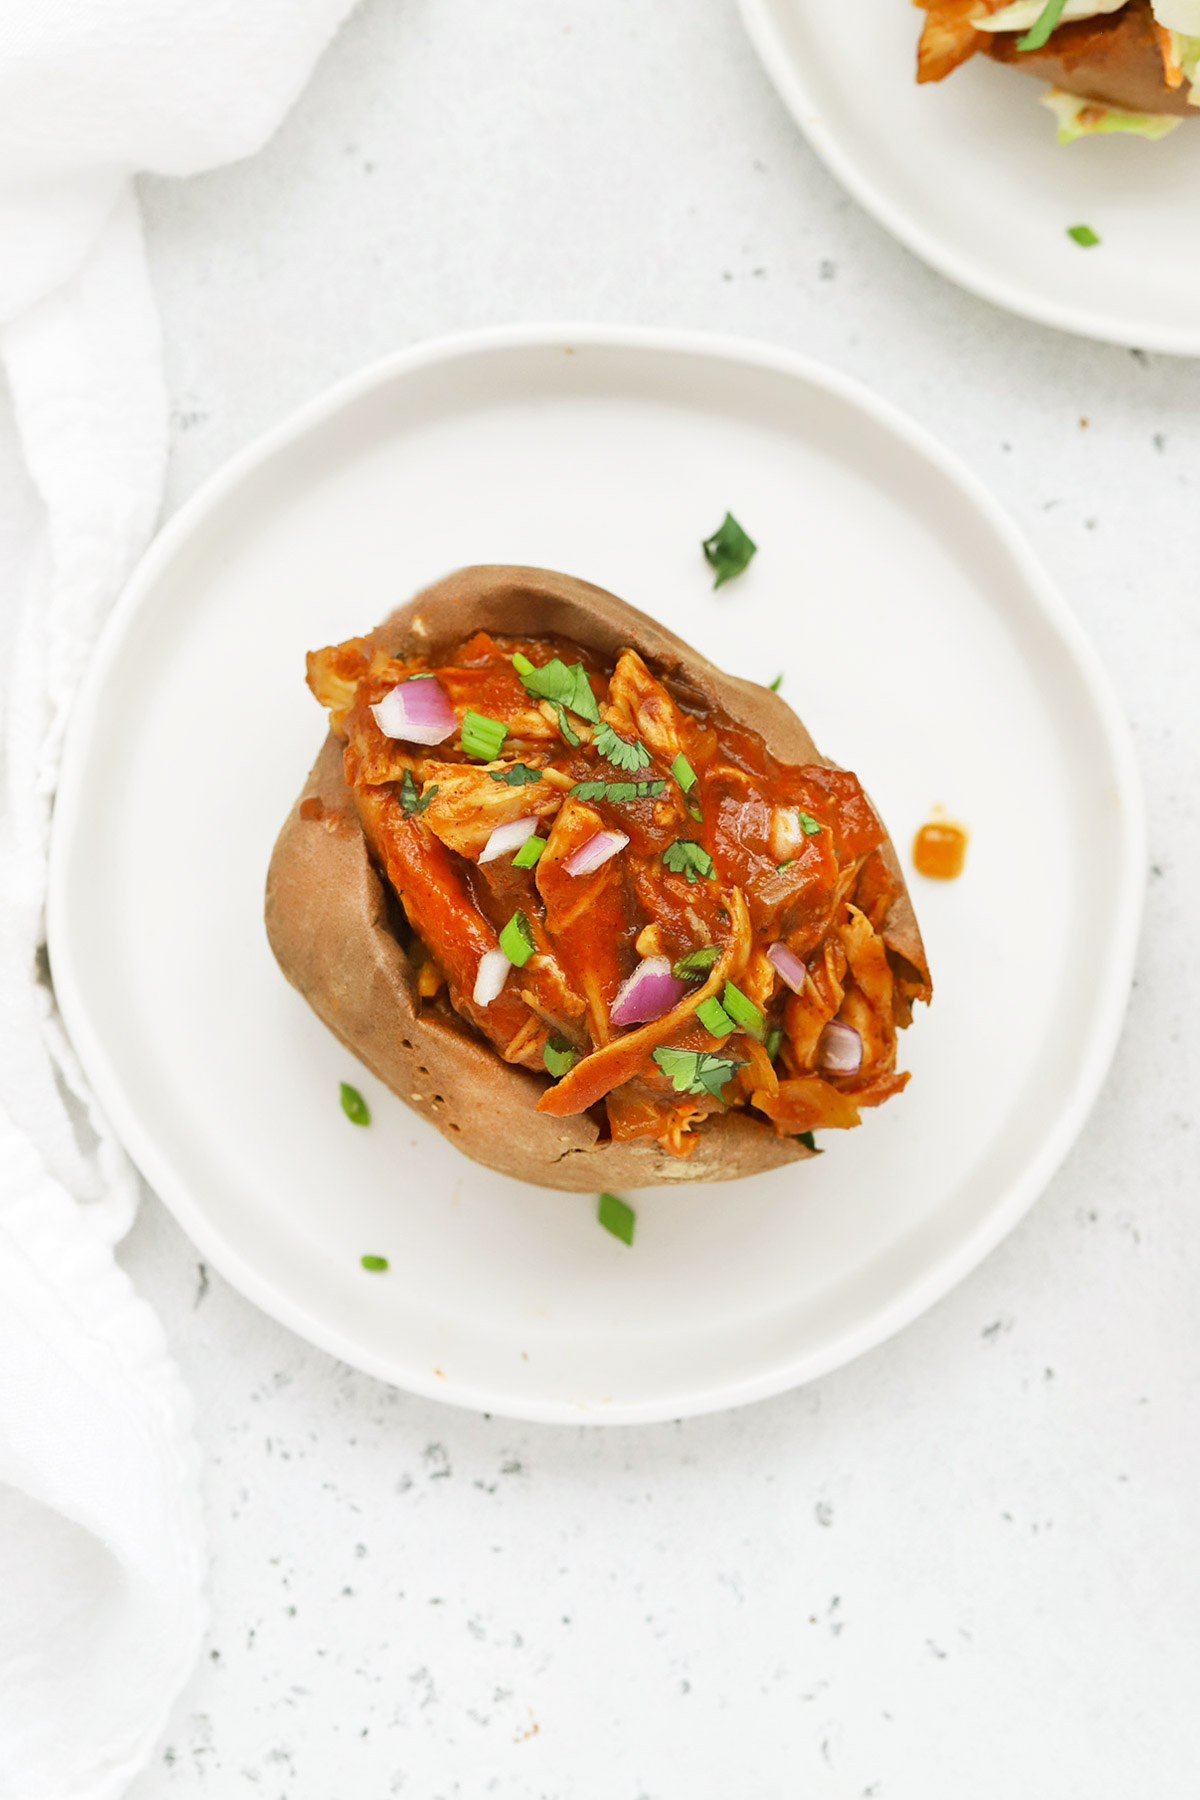 Overhead view of a sweet potato stuffed with Slow Cooker BBQ Chicken